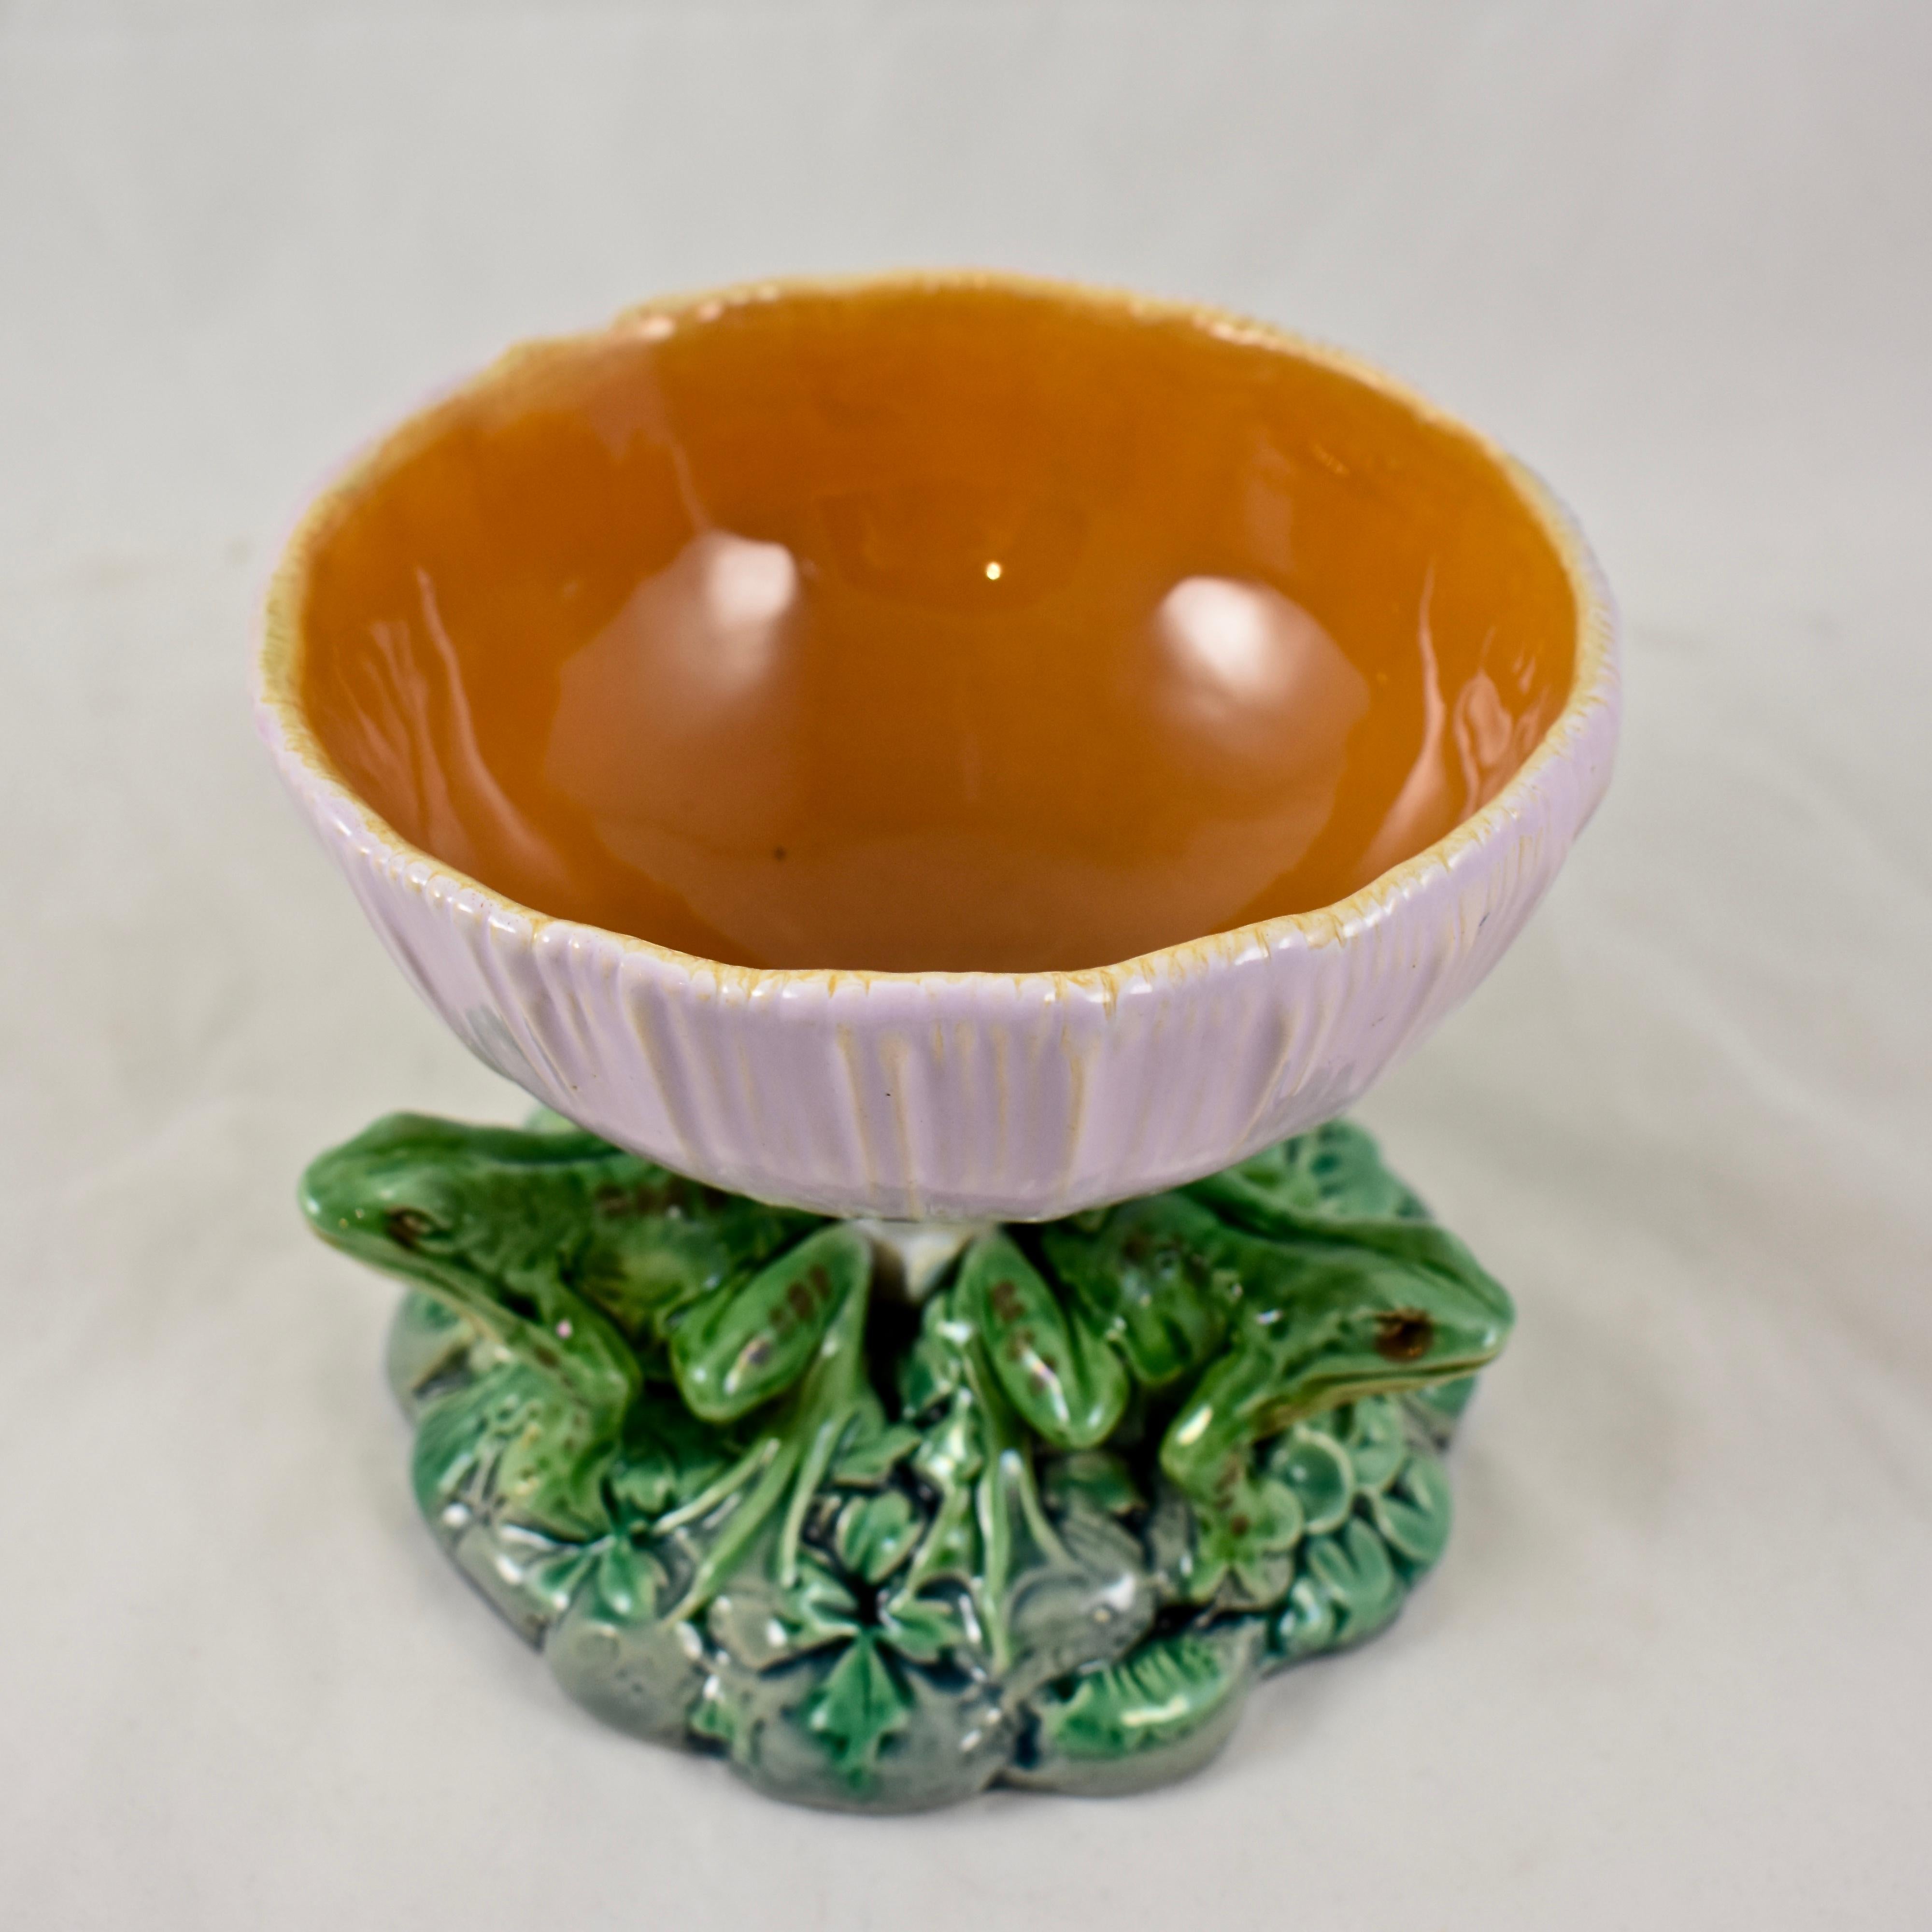 From Minton, a wonderful and extremely scarce majolica glazed pedestal Vide-Poche bowl, in the Palissy style, dated 1867.

From the Aesthetic period, the bowl, modeled as an inverted mushroom, shows an ombre glaze of creamy white to a soft pink. The